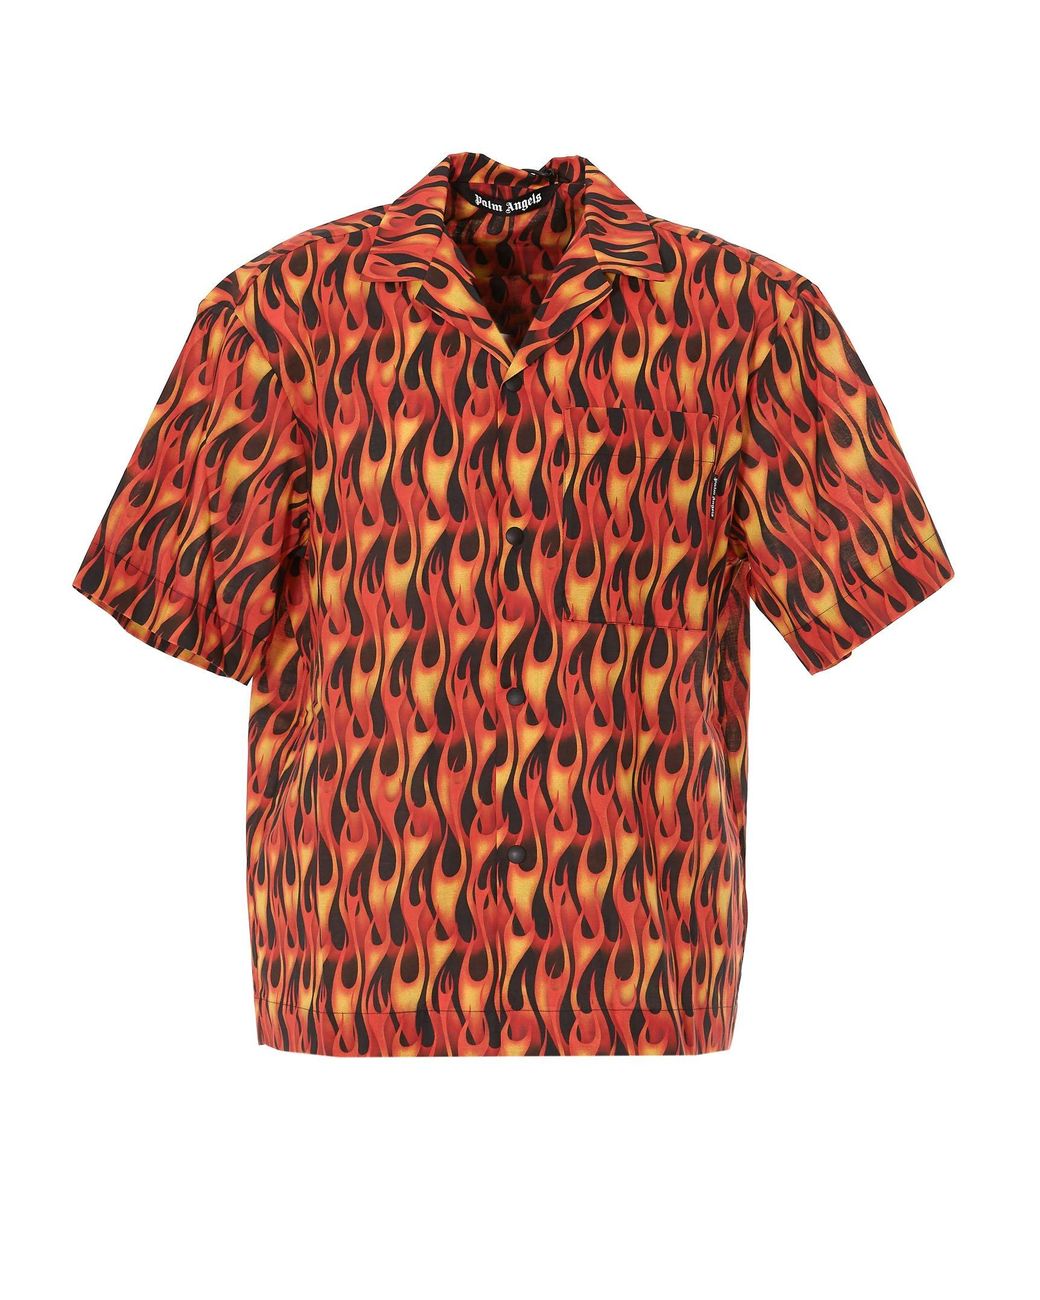 Palm Angels Cotton Flame Printed Shirt in Orange for Men - Lyst